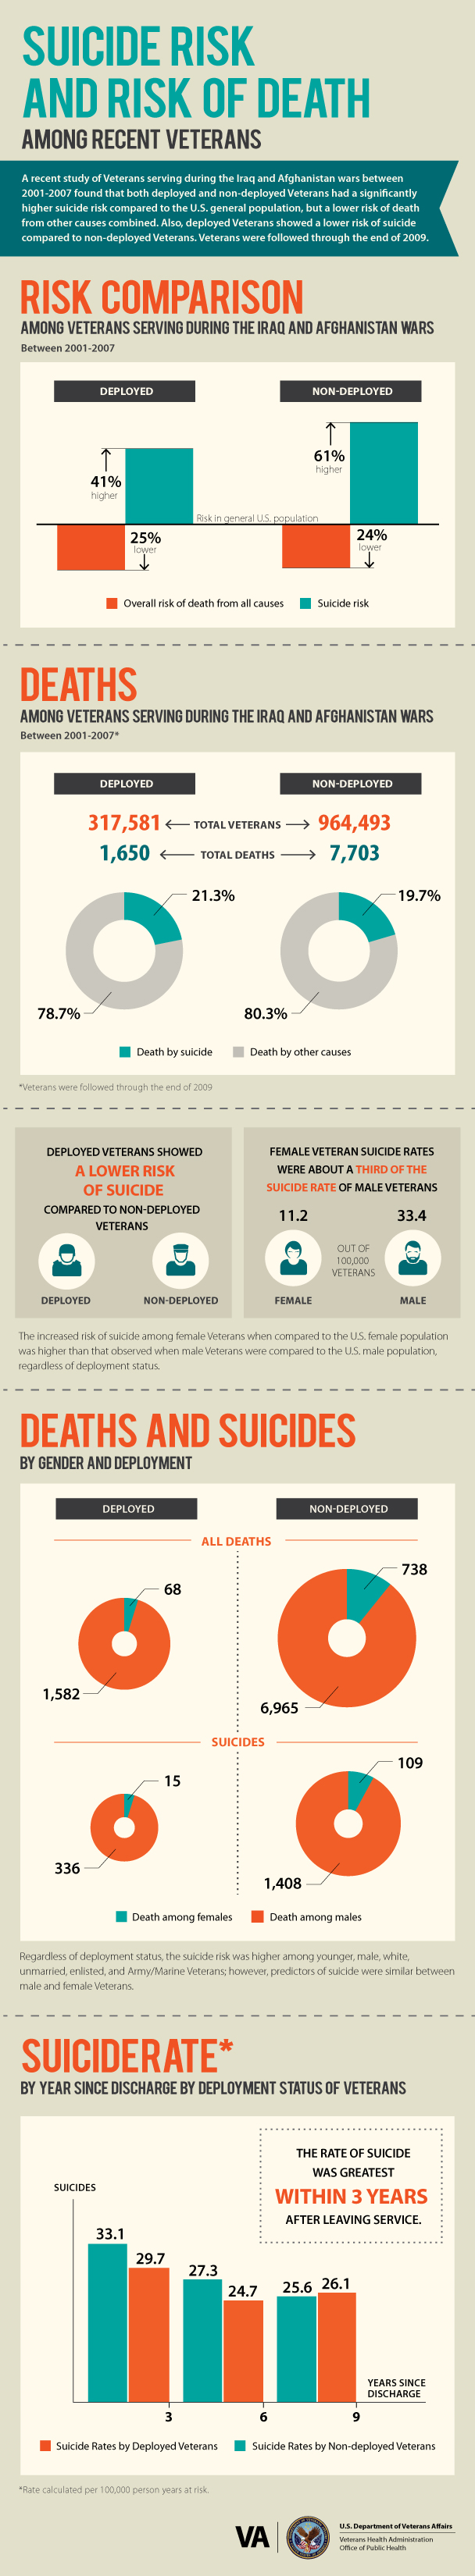 Infographic detailing the risk of suicide in recent Veterans.